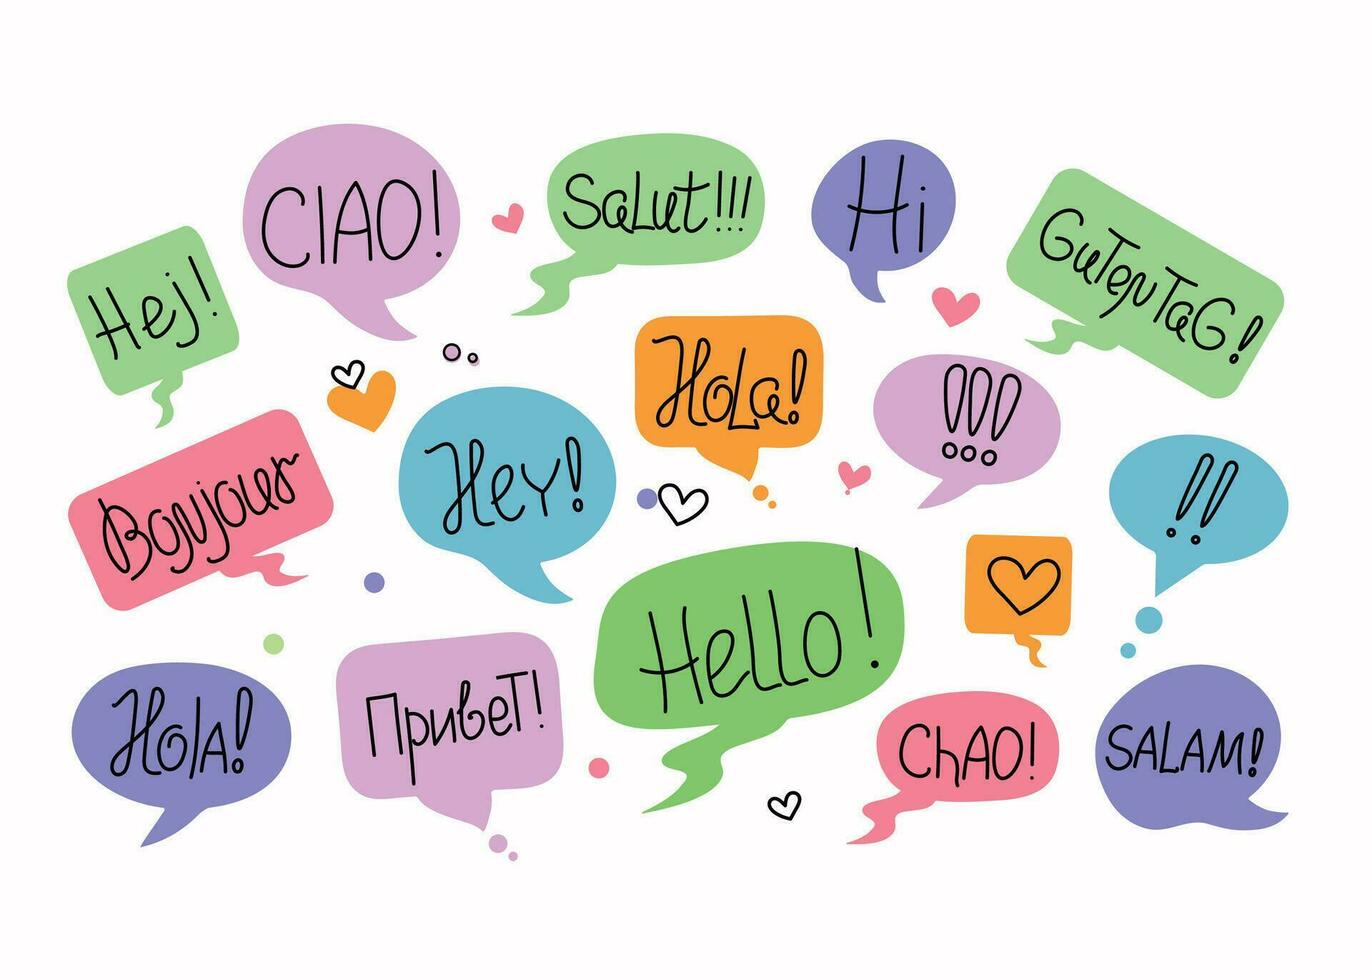 Short phrases in different languages, greetings. Information forms, speech bubbles. World Hello Day. November 21. Funny vector banner, Calligraphy lettering, words. Talk, communicate, social media.